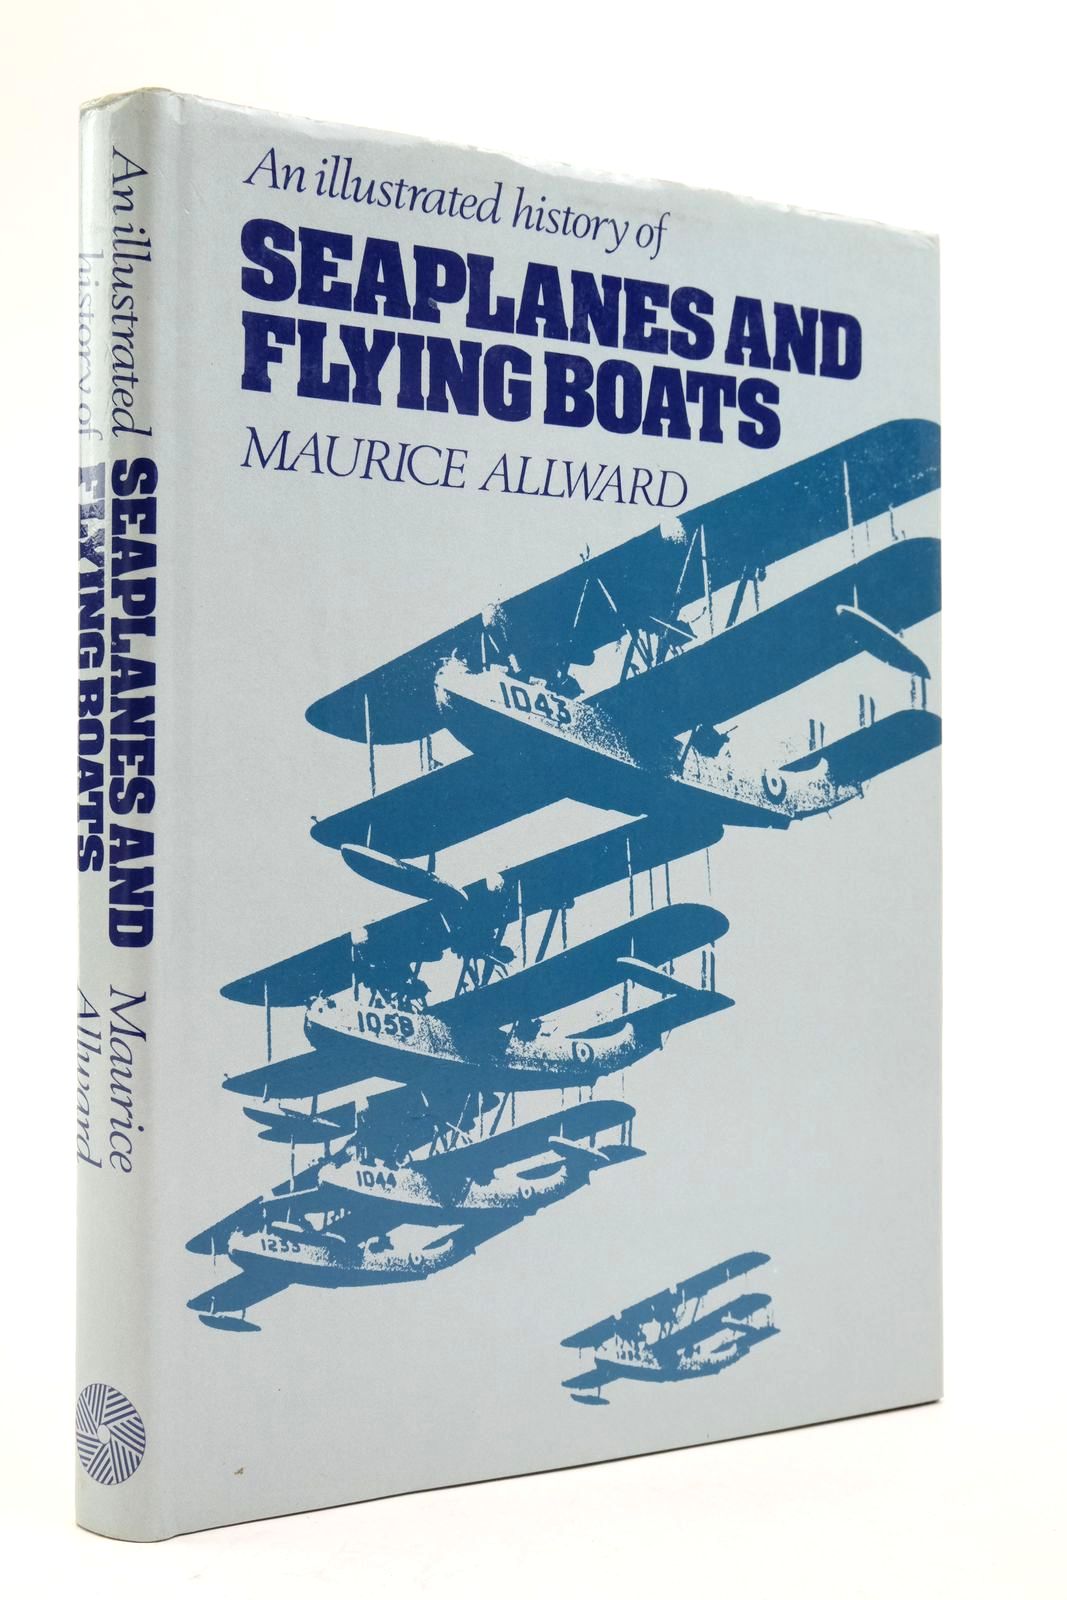 Photo of AN ILLUSTRATED HISTORY OF SEAPLANES AND FLYING BOATS written by Allward, Maurice published by Moorland Publishing (STOCK CODE: 2138479)  for sale by Stella & Rose's Books